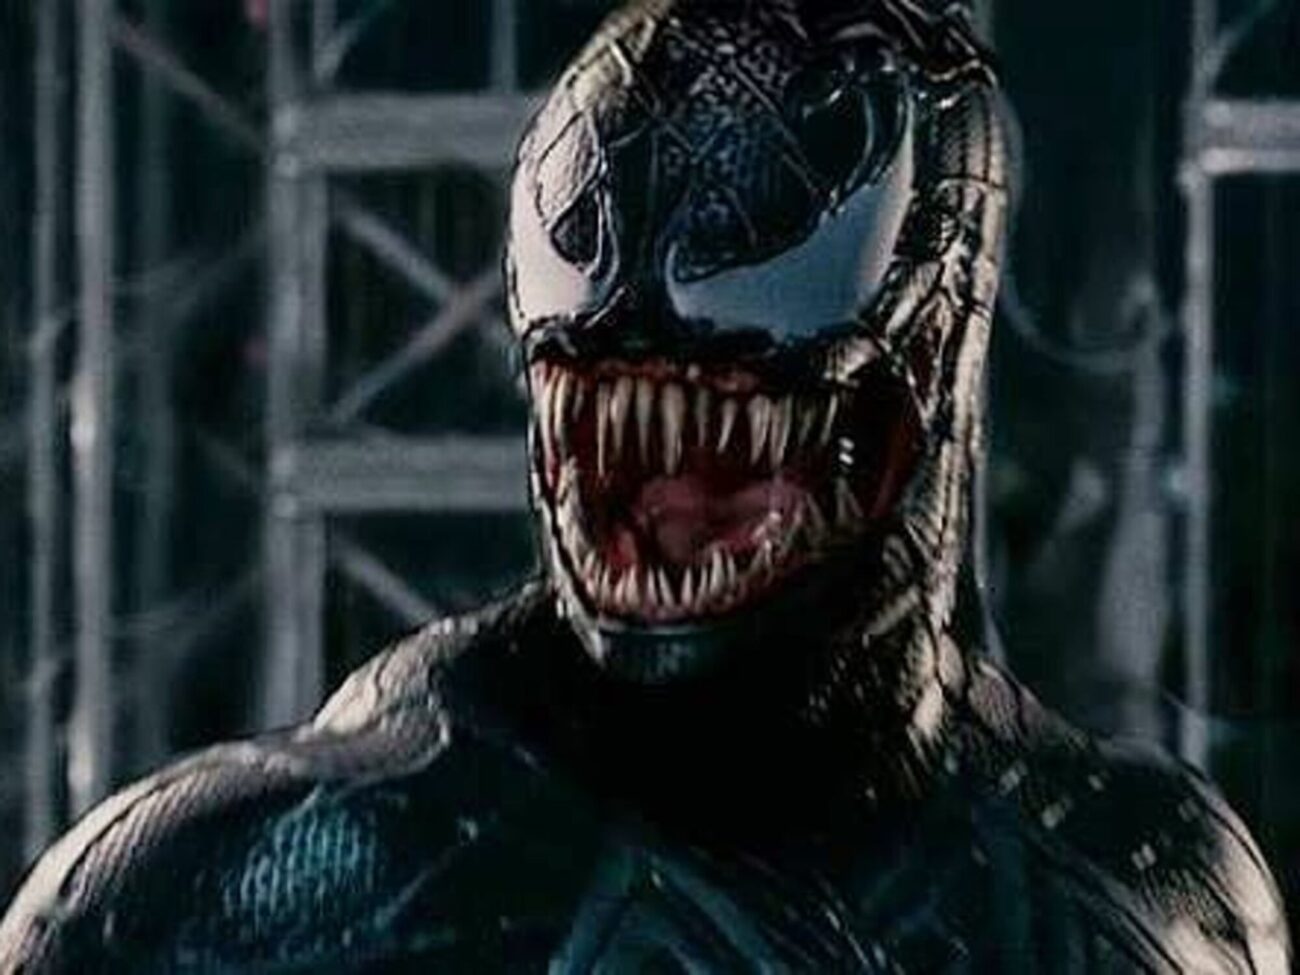 An upcoming movie that features Spider-Man and Venom battling it out only makes perfect sense. Could Tom Hardy make this movie happen?